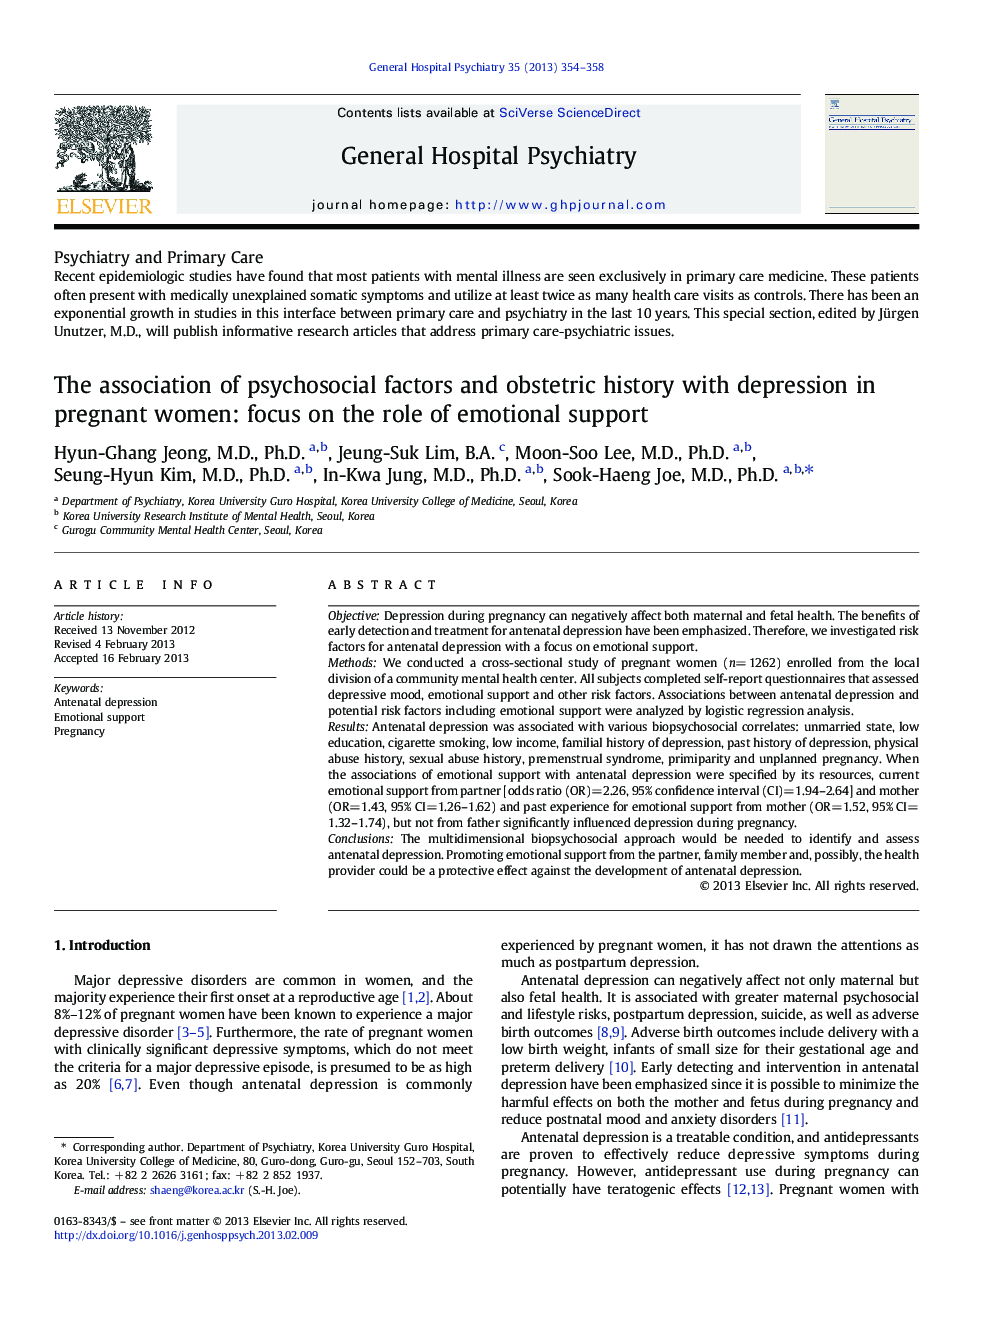 Psychiatry and Primary Care1The association of psychosocial factors and obstetric history with depression in pregnant women: focus on the role of emotional support